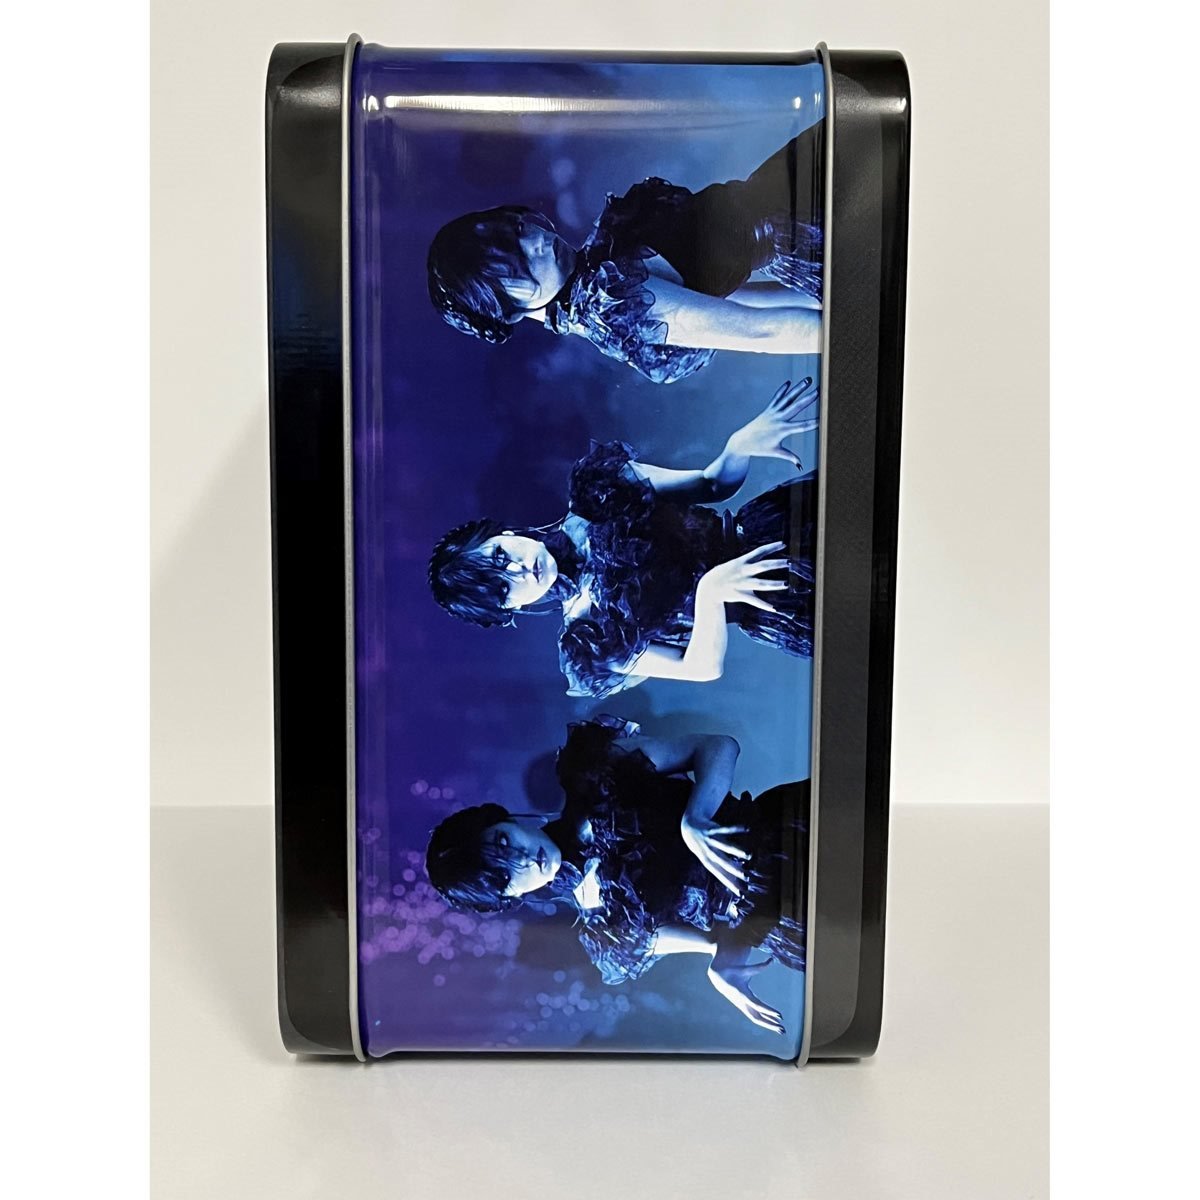 Addams Family Lunchbox with Thermos Flower Delivery Services for